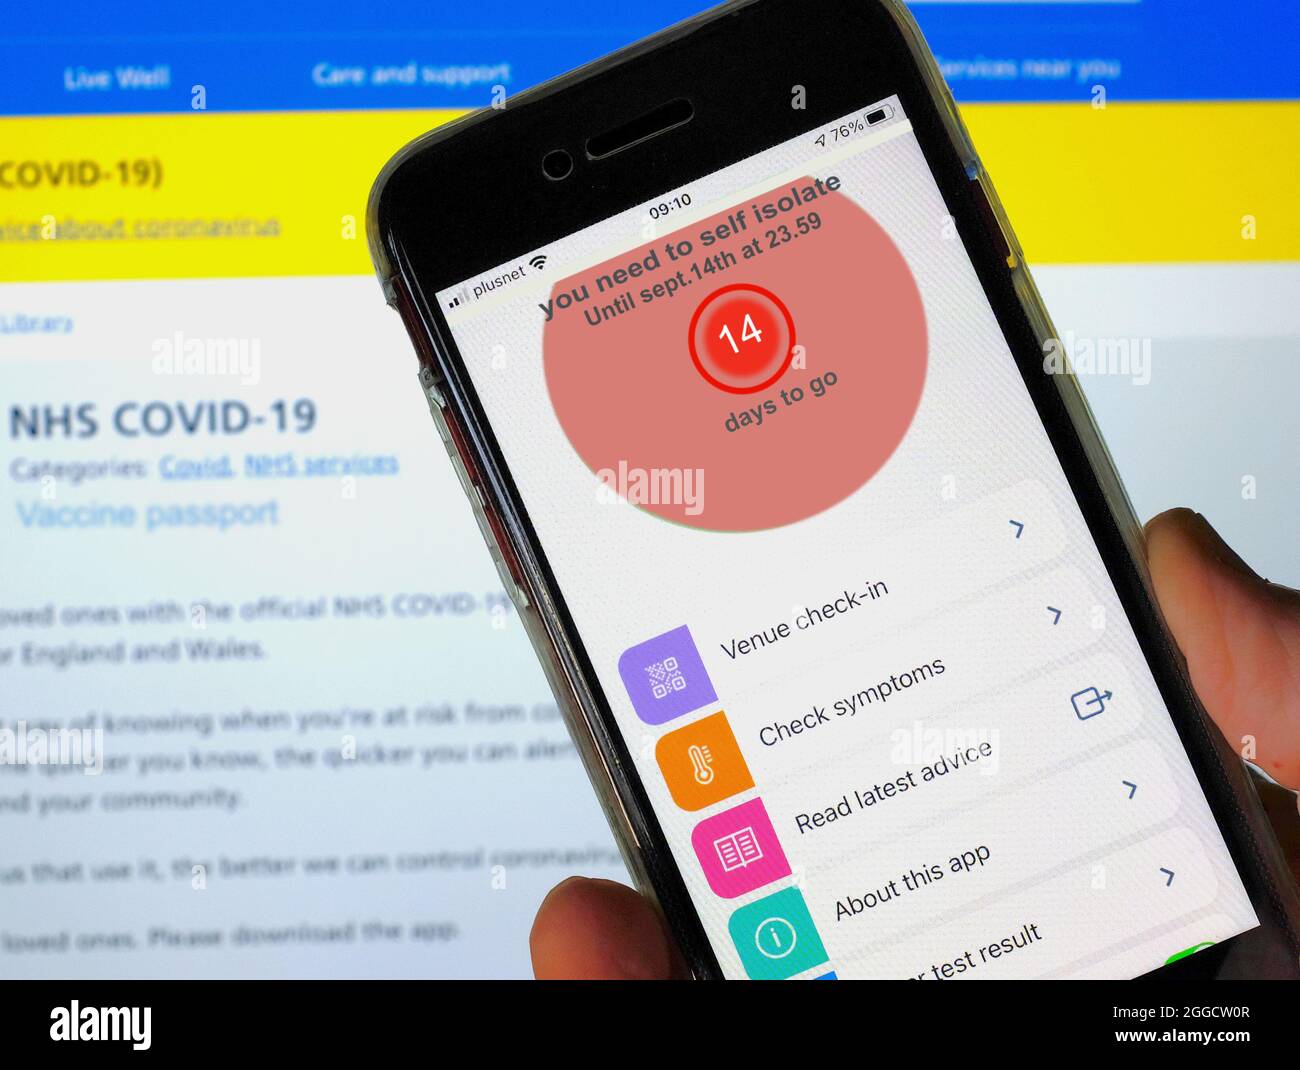 The UK NHS Track and trace app warning you that you have been near someone with covid and must isolate for 14 days. Stock Photo